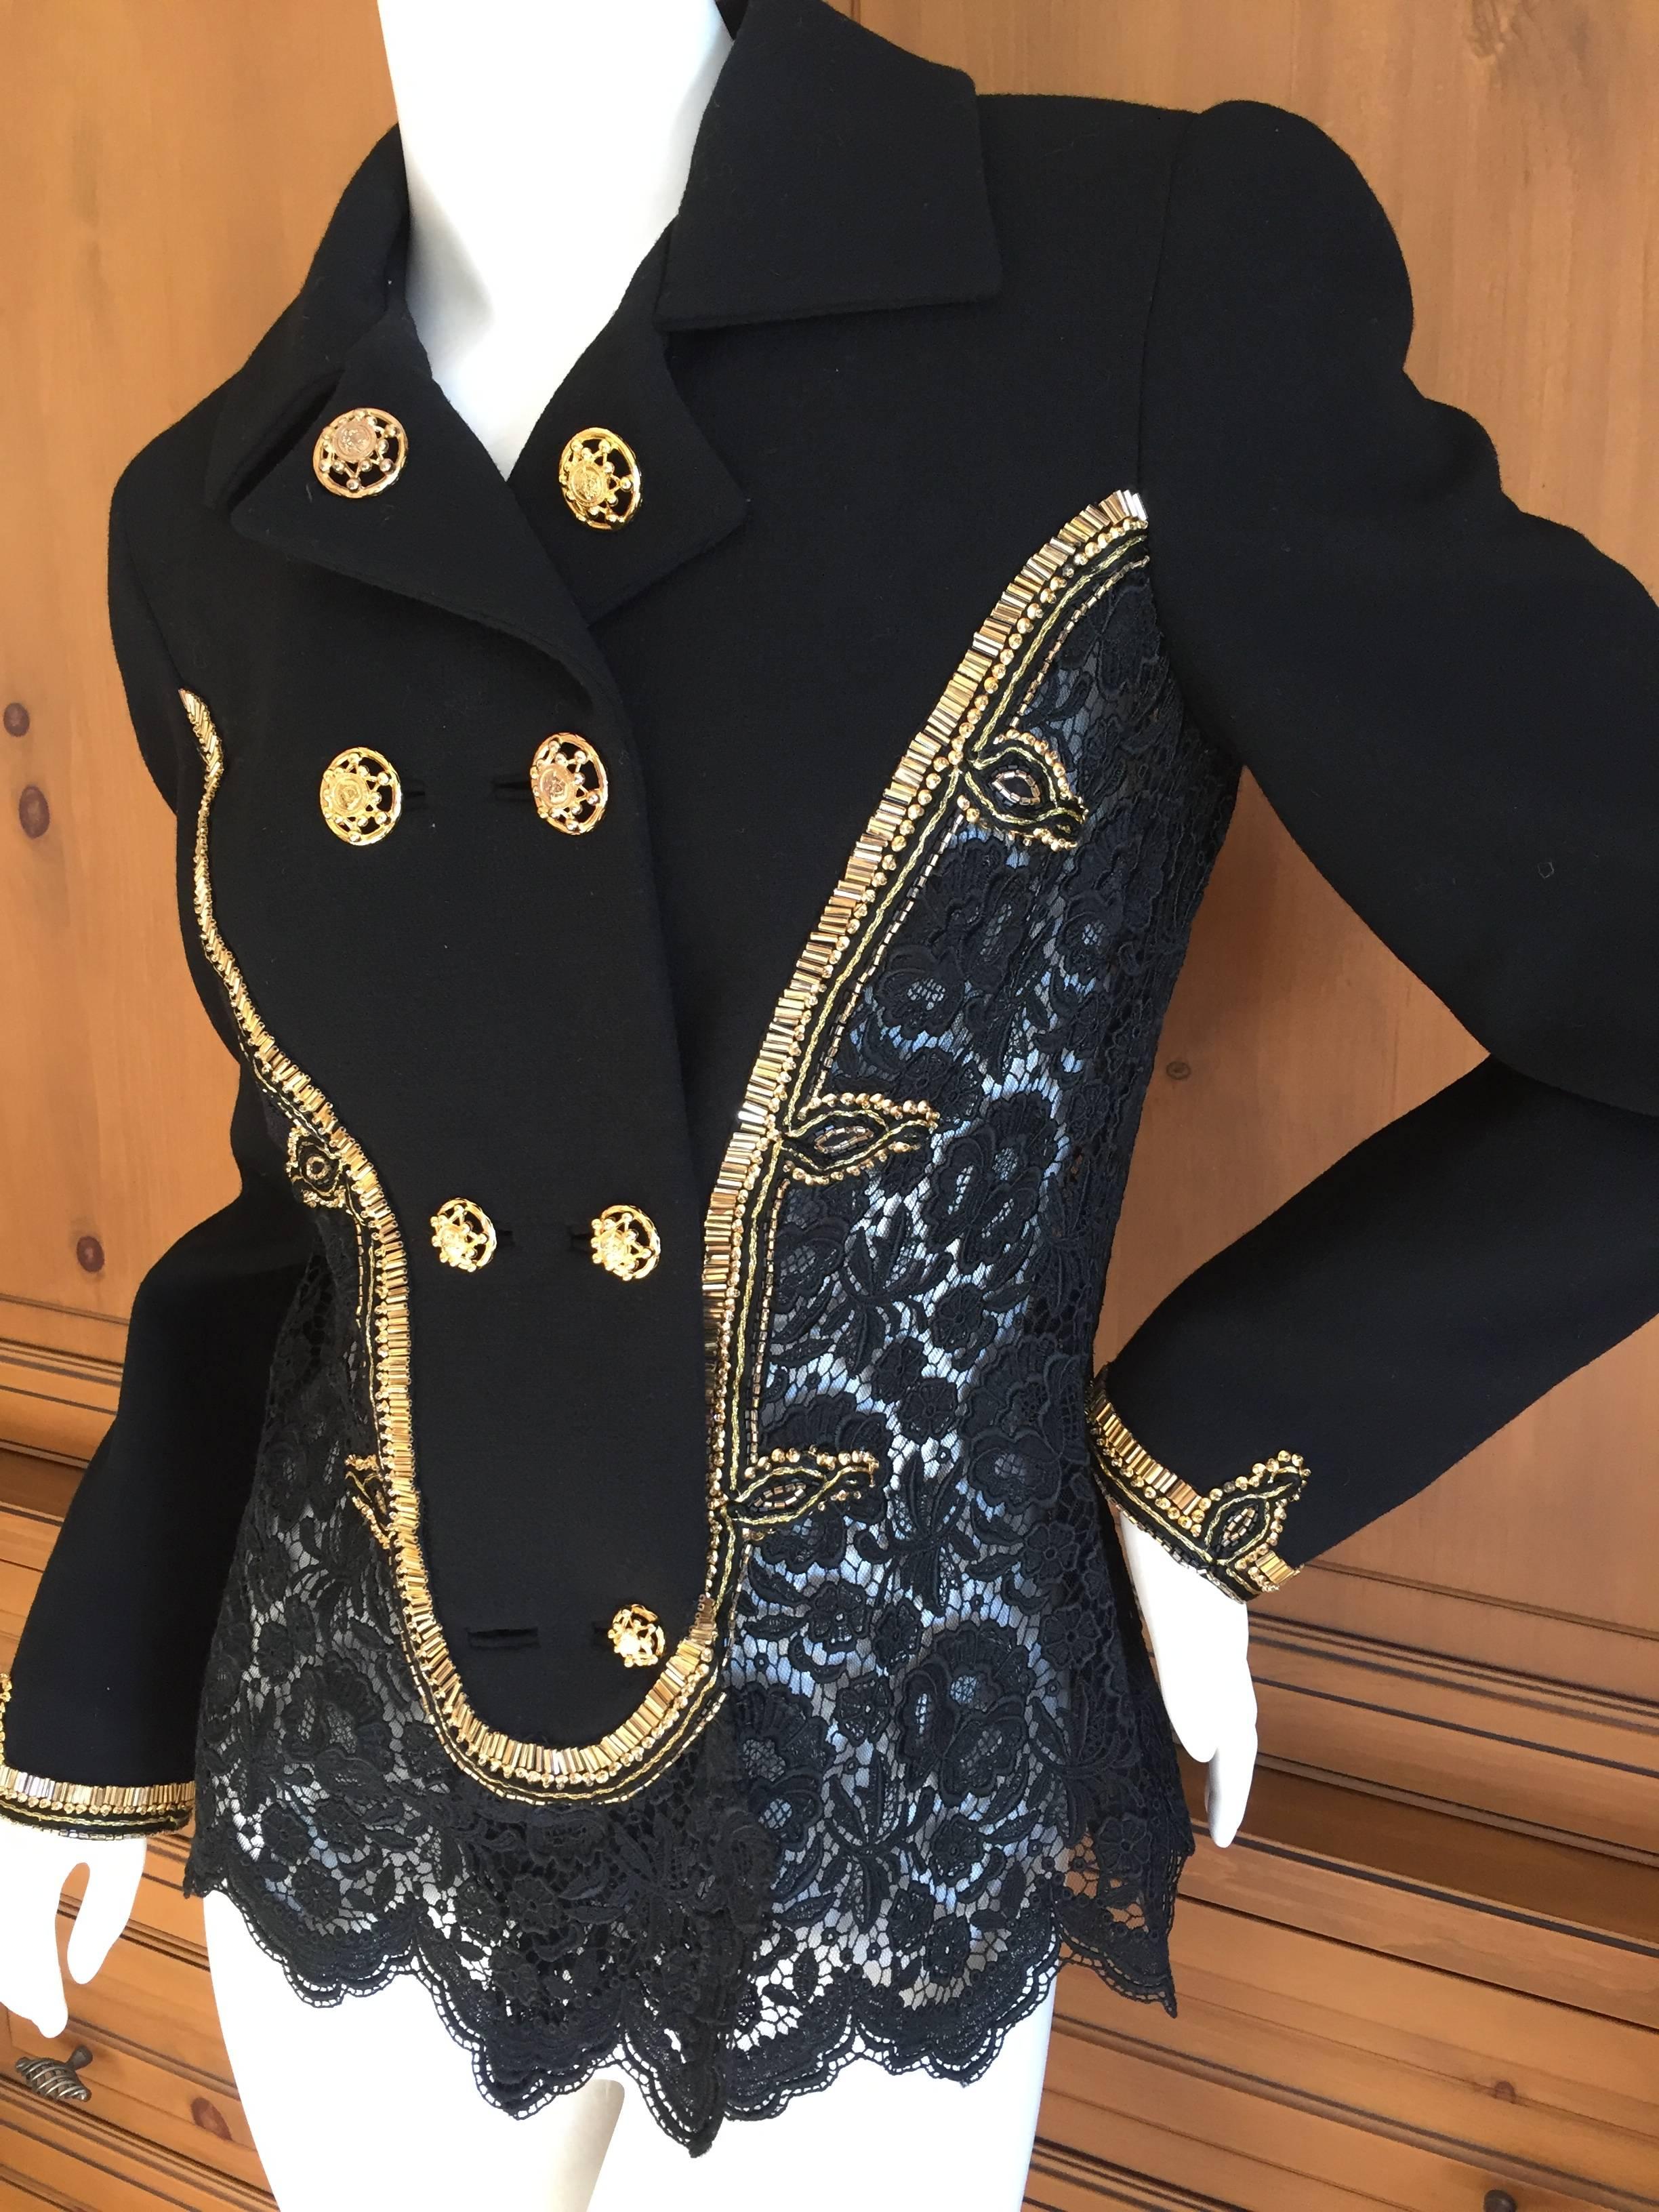 Gianni Versace Couture 1992 Beaded Black Lace Jacket For Sale 6